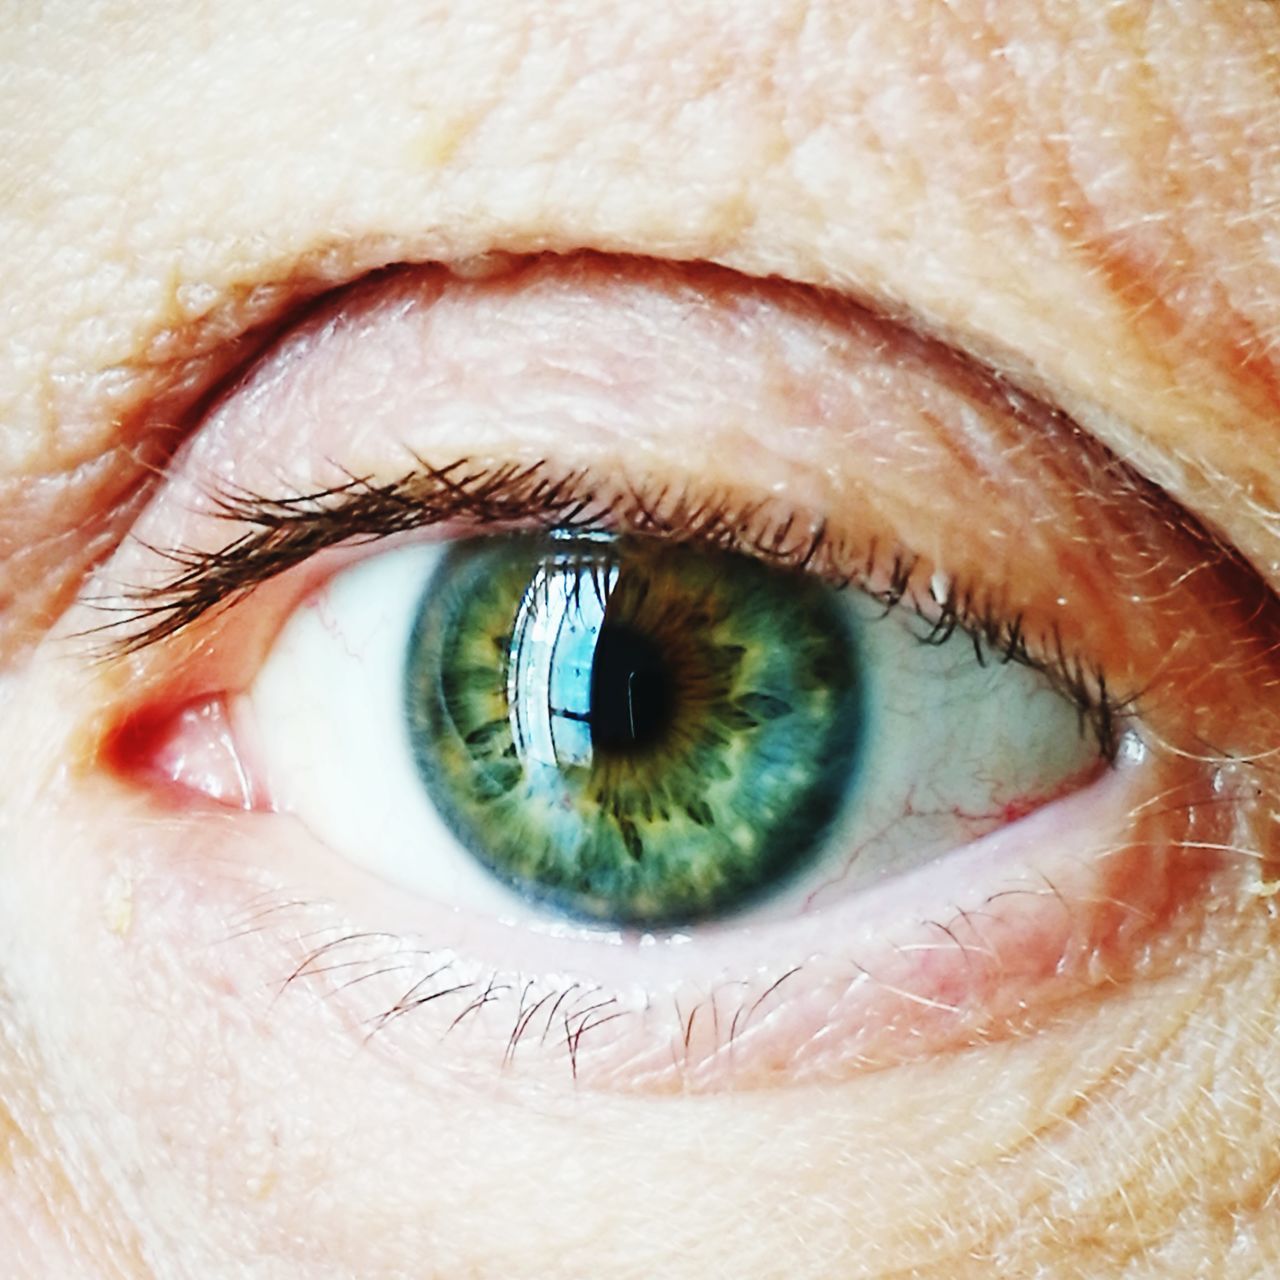 EXTREME CLOSE-UP OF EYE OF HUMAN FACE